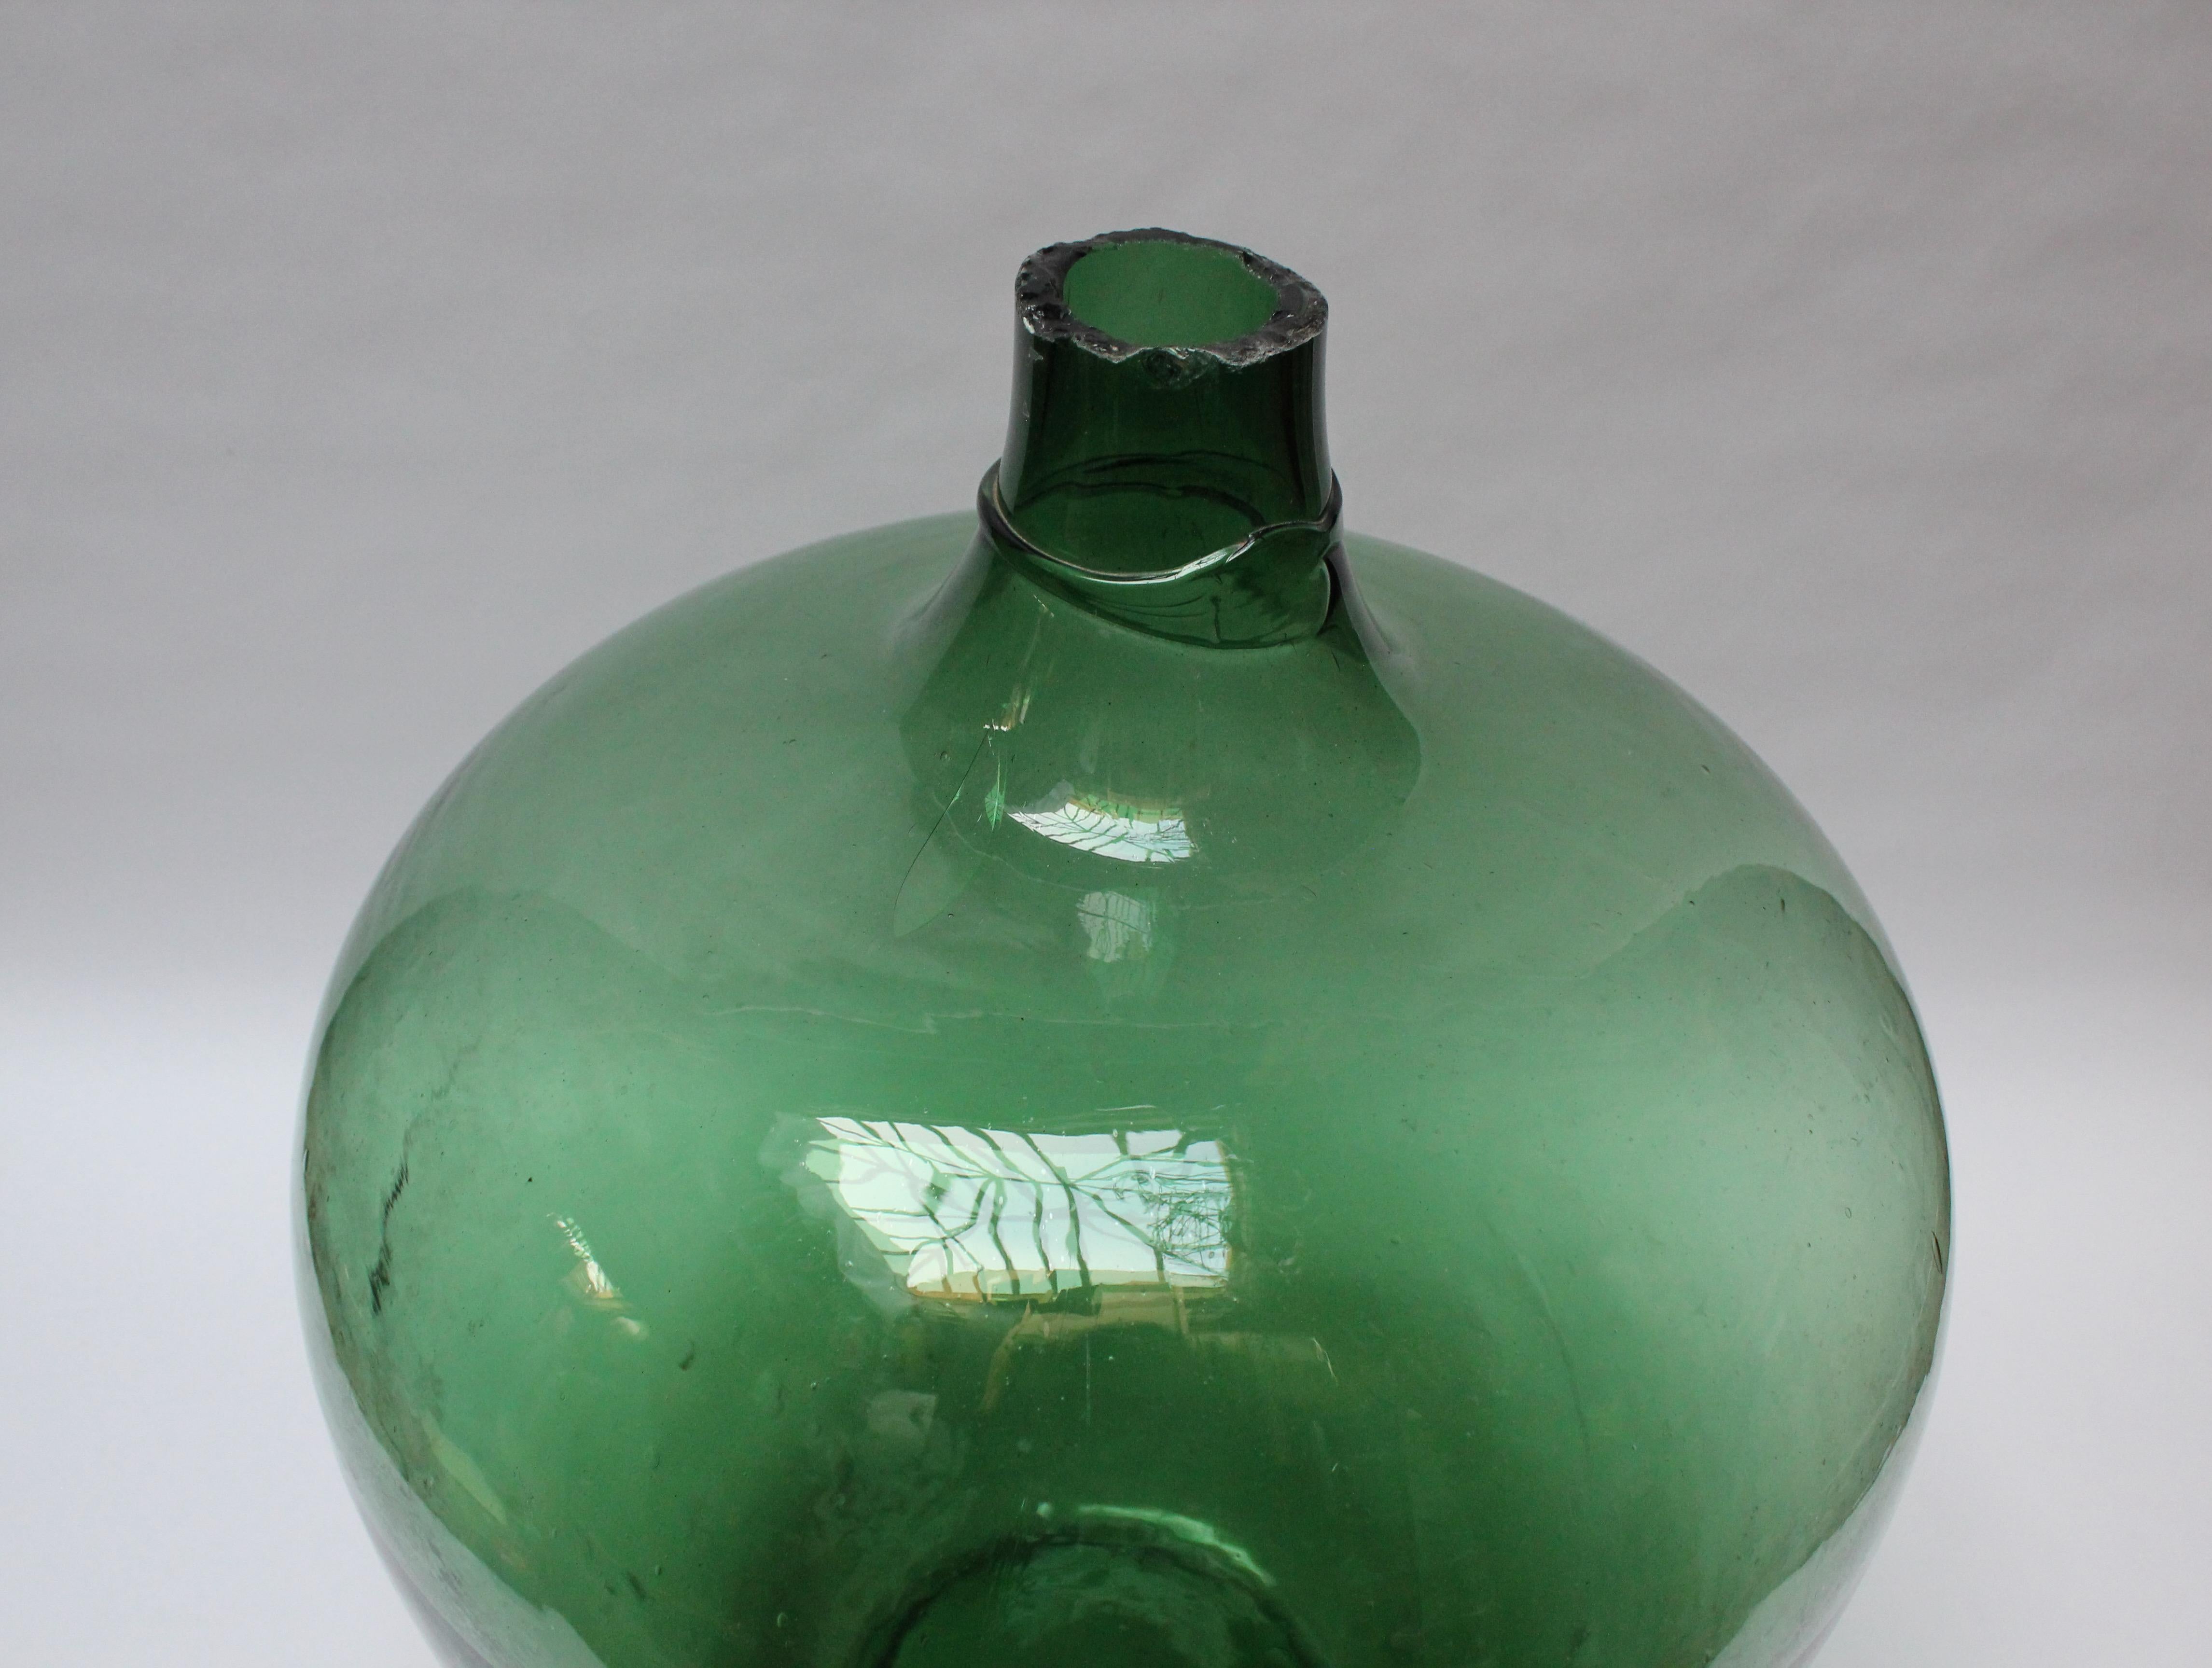 French Antique Mouth Blown Glass Bulbous Demijohn in Emerald Green